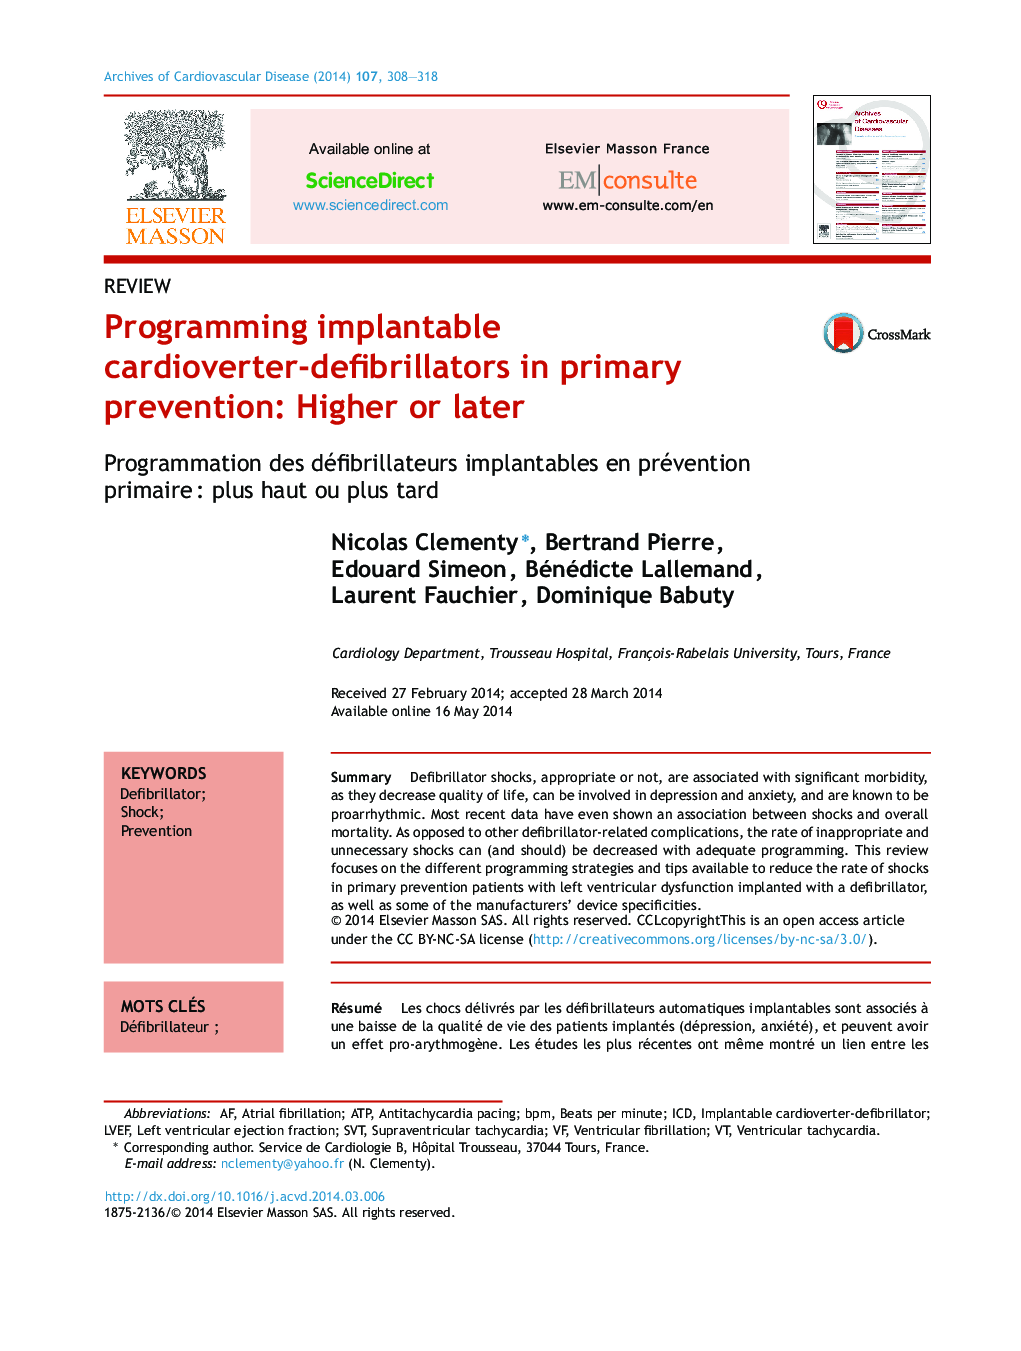 Programming implantable cardioverter-defibrillators in primary prevention: Higher or later